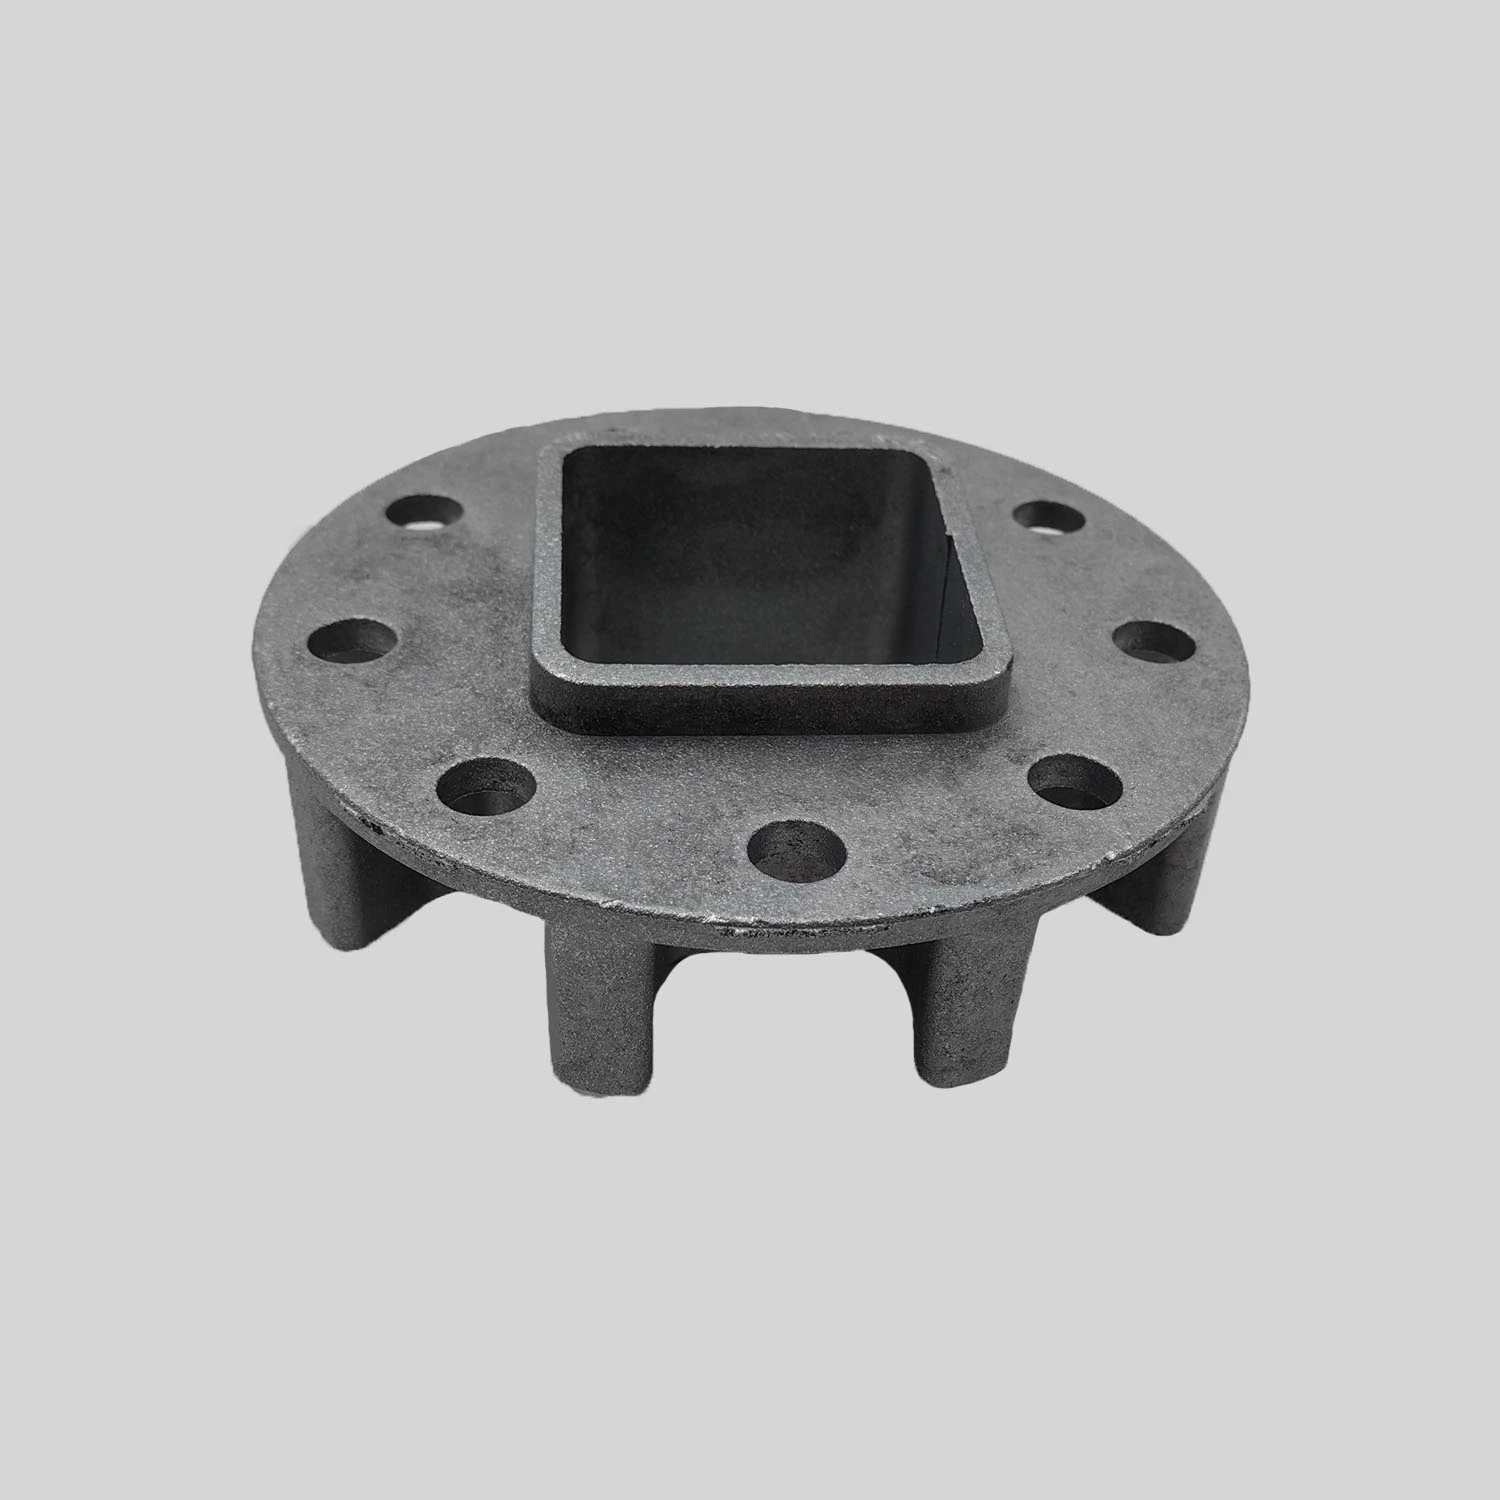 Custom Die Casting Mold Aluminum Die Casting Parts Products Made in Original Factory OEM Low Price